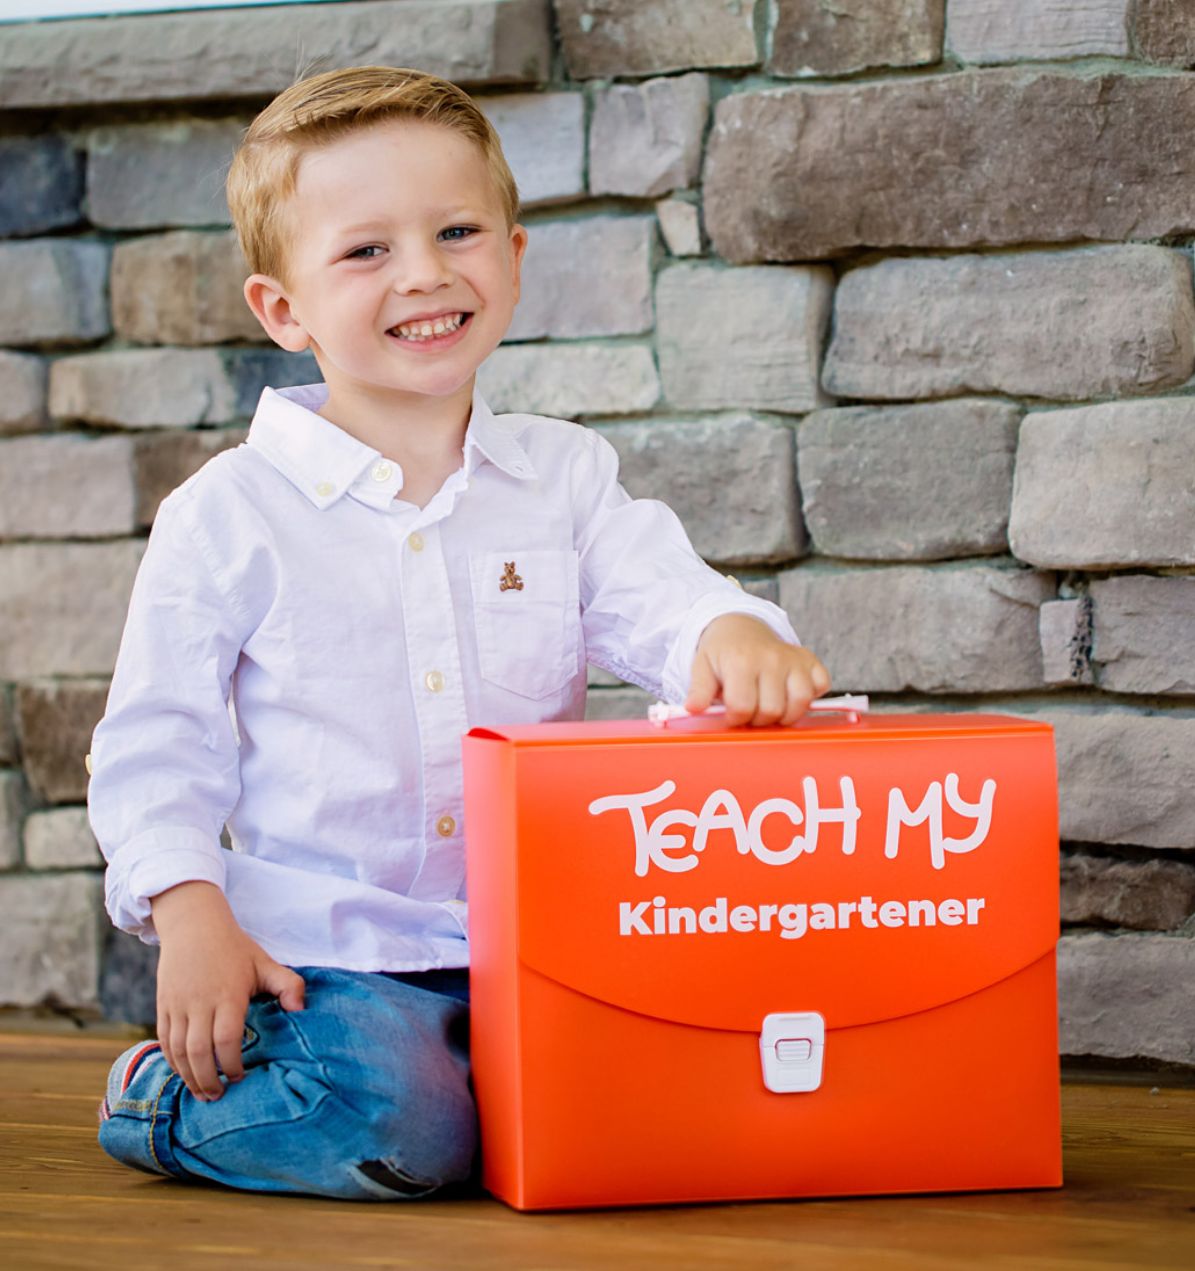 Get Your Kids Ready for School with Screen-Free Teach My Learning Kits! #Back2School21